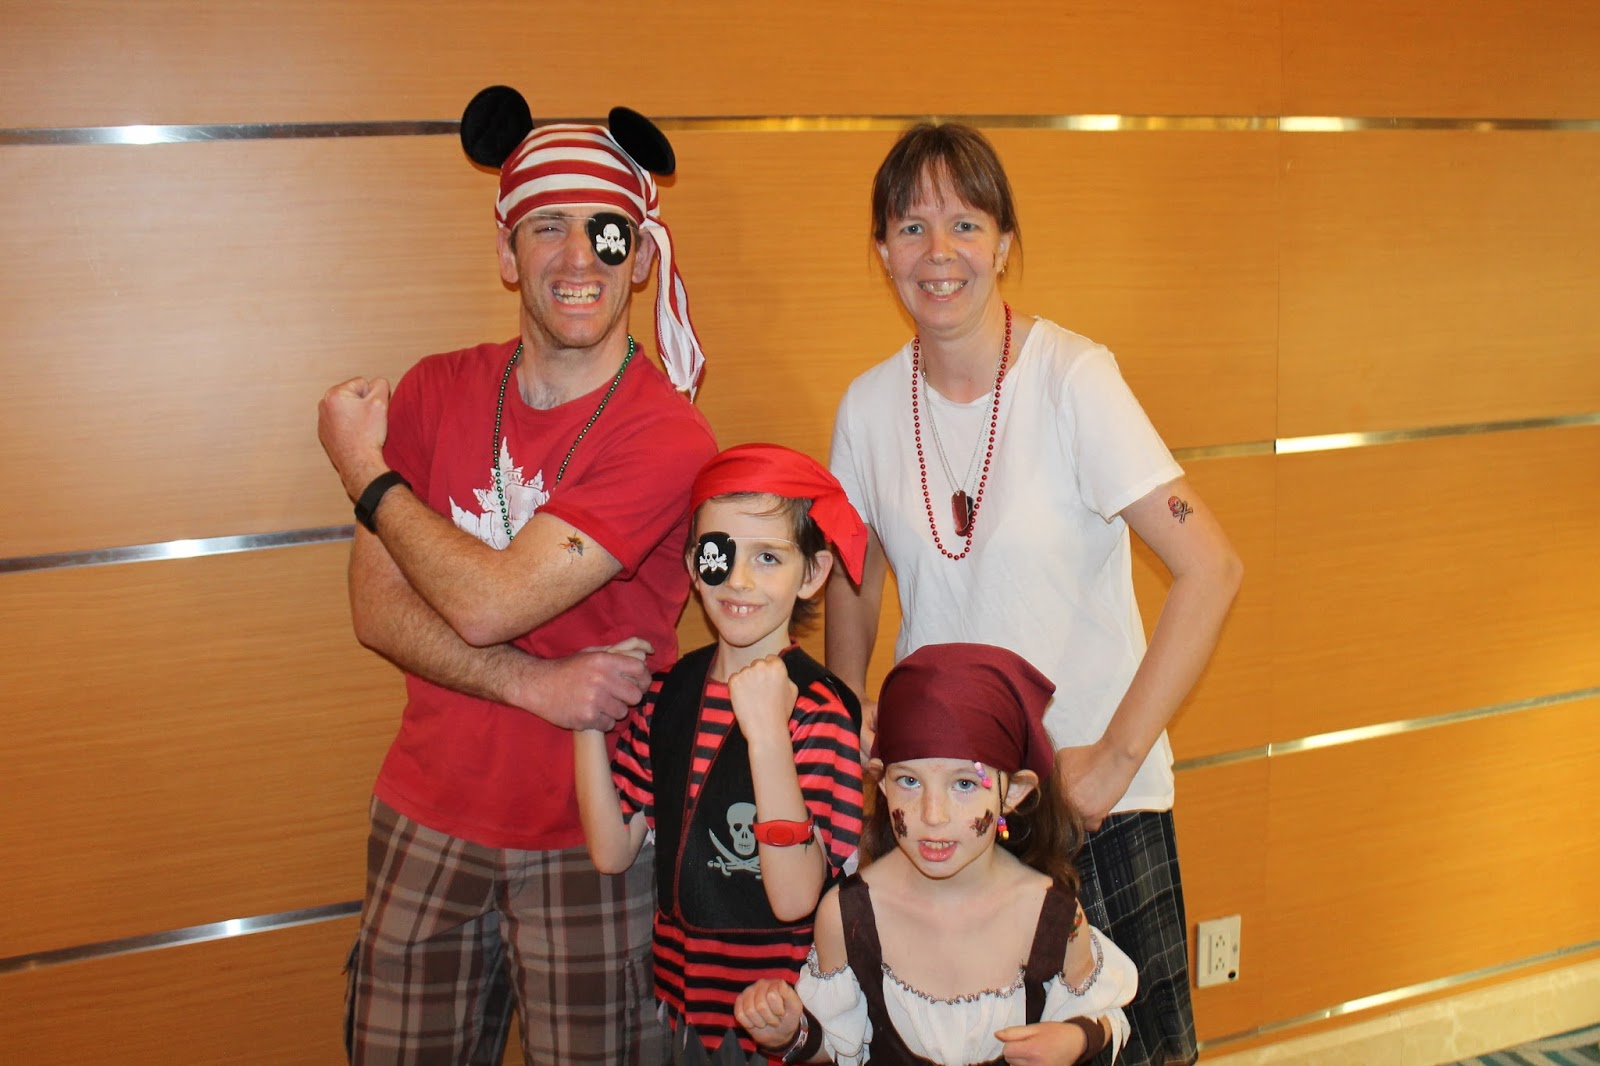 Here's The Scoop: Disney Cruise: That Time We Let Our Inner